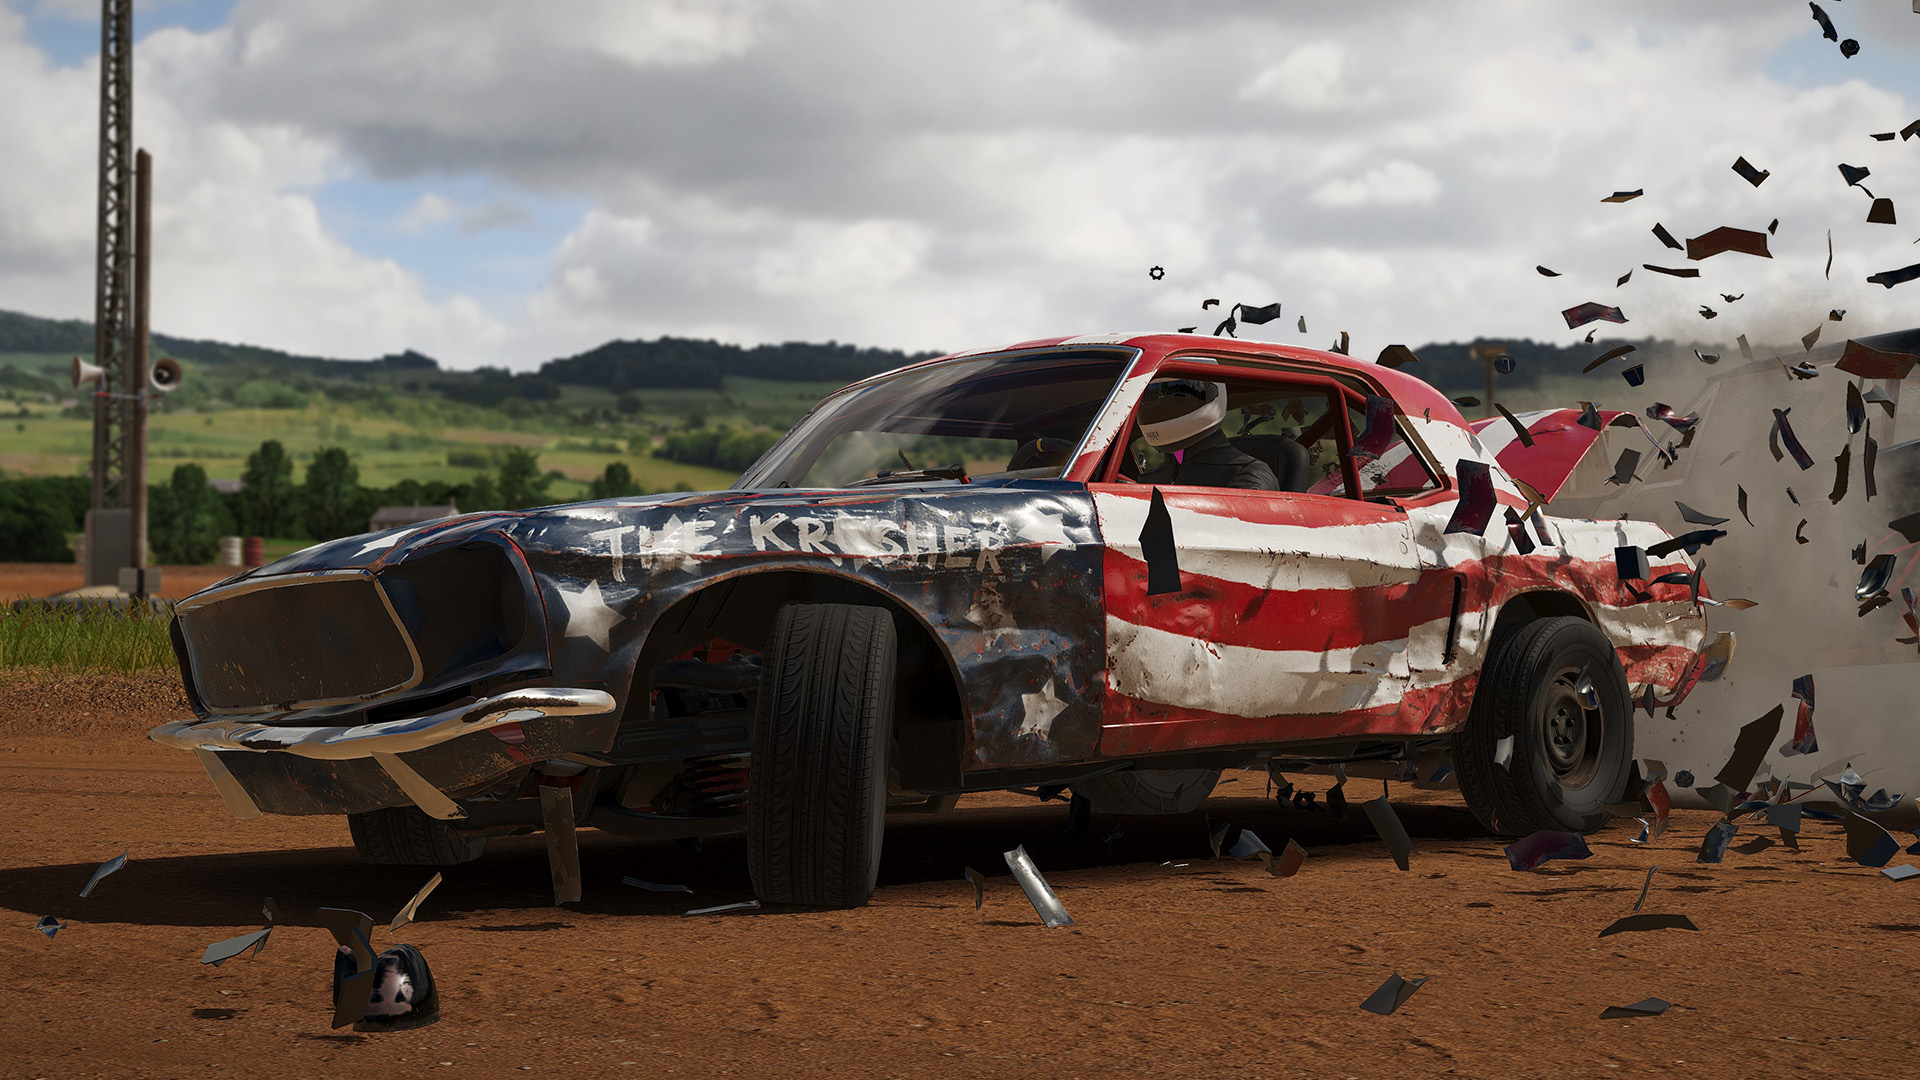 Wreckfest is coming to Switch